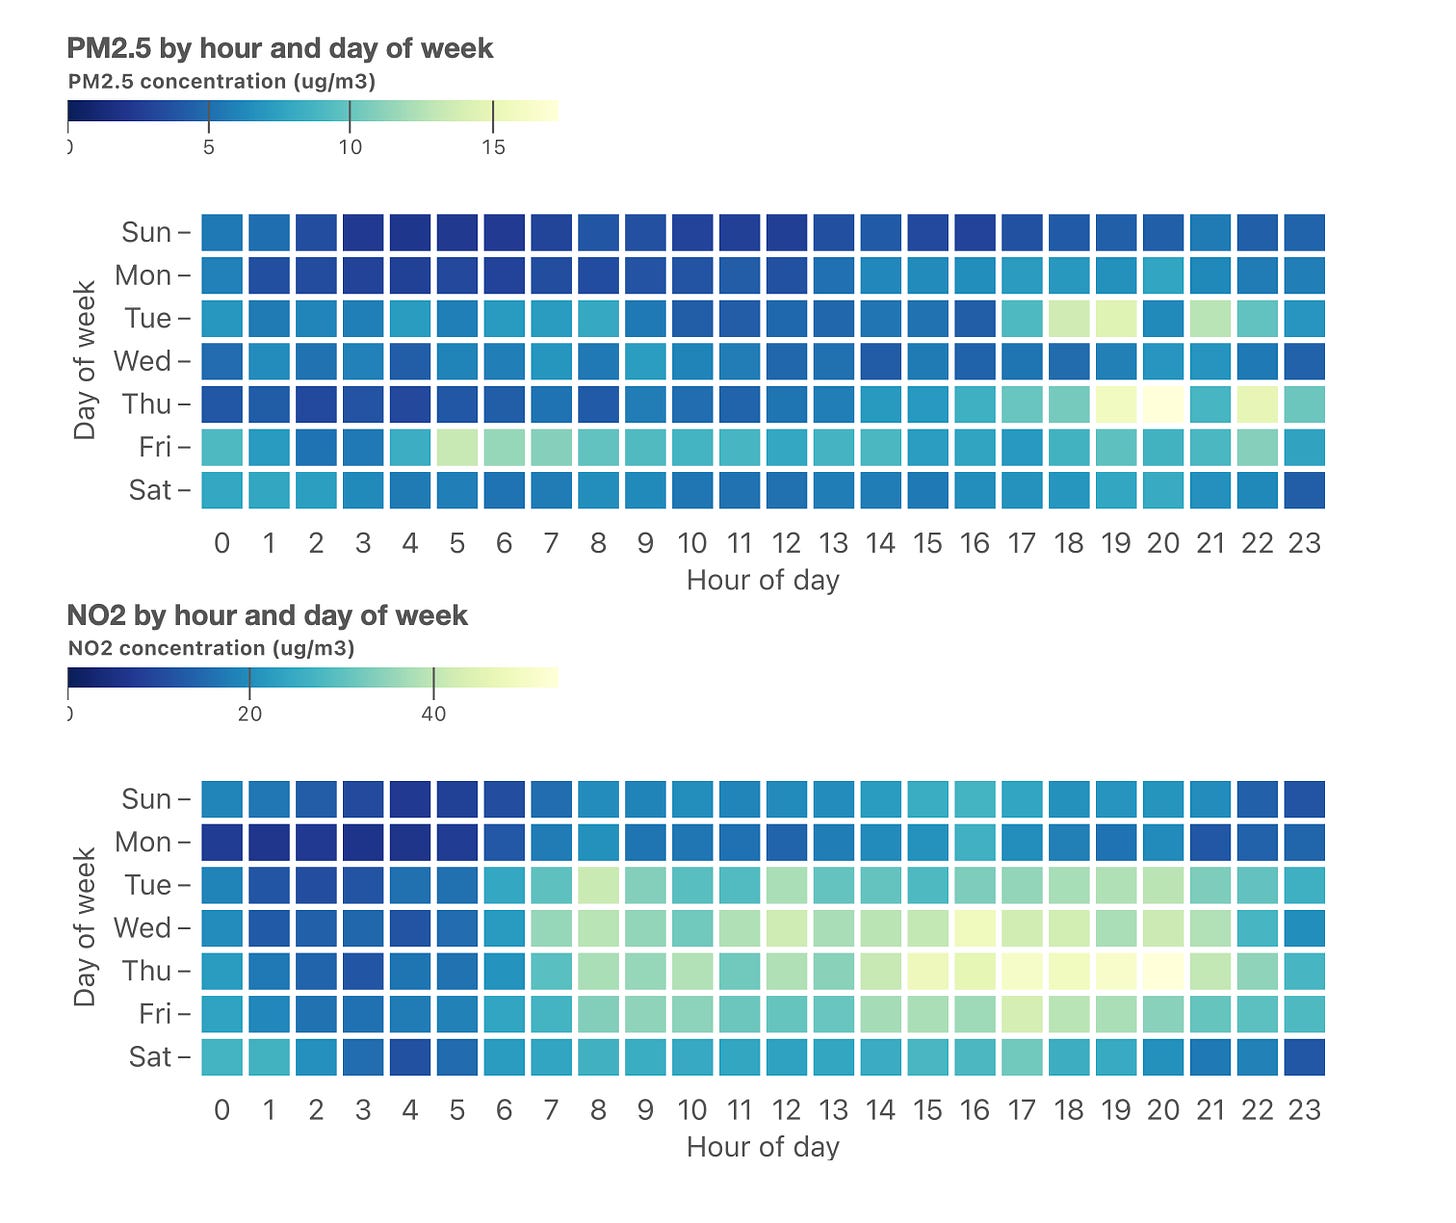 Charts showing air pollution levels by day of week and time of day